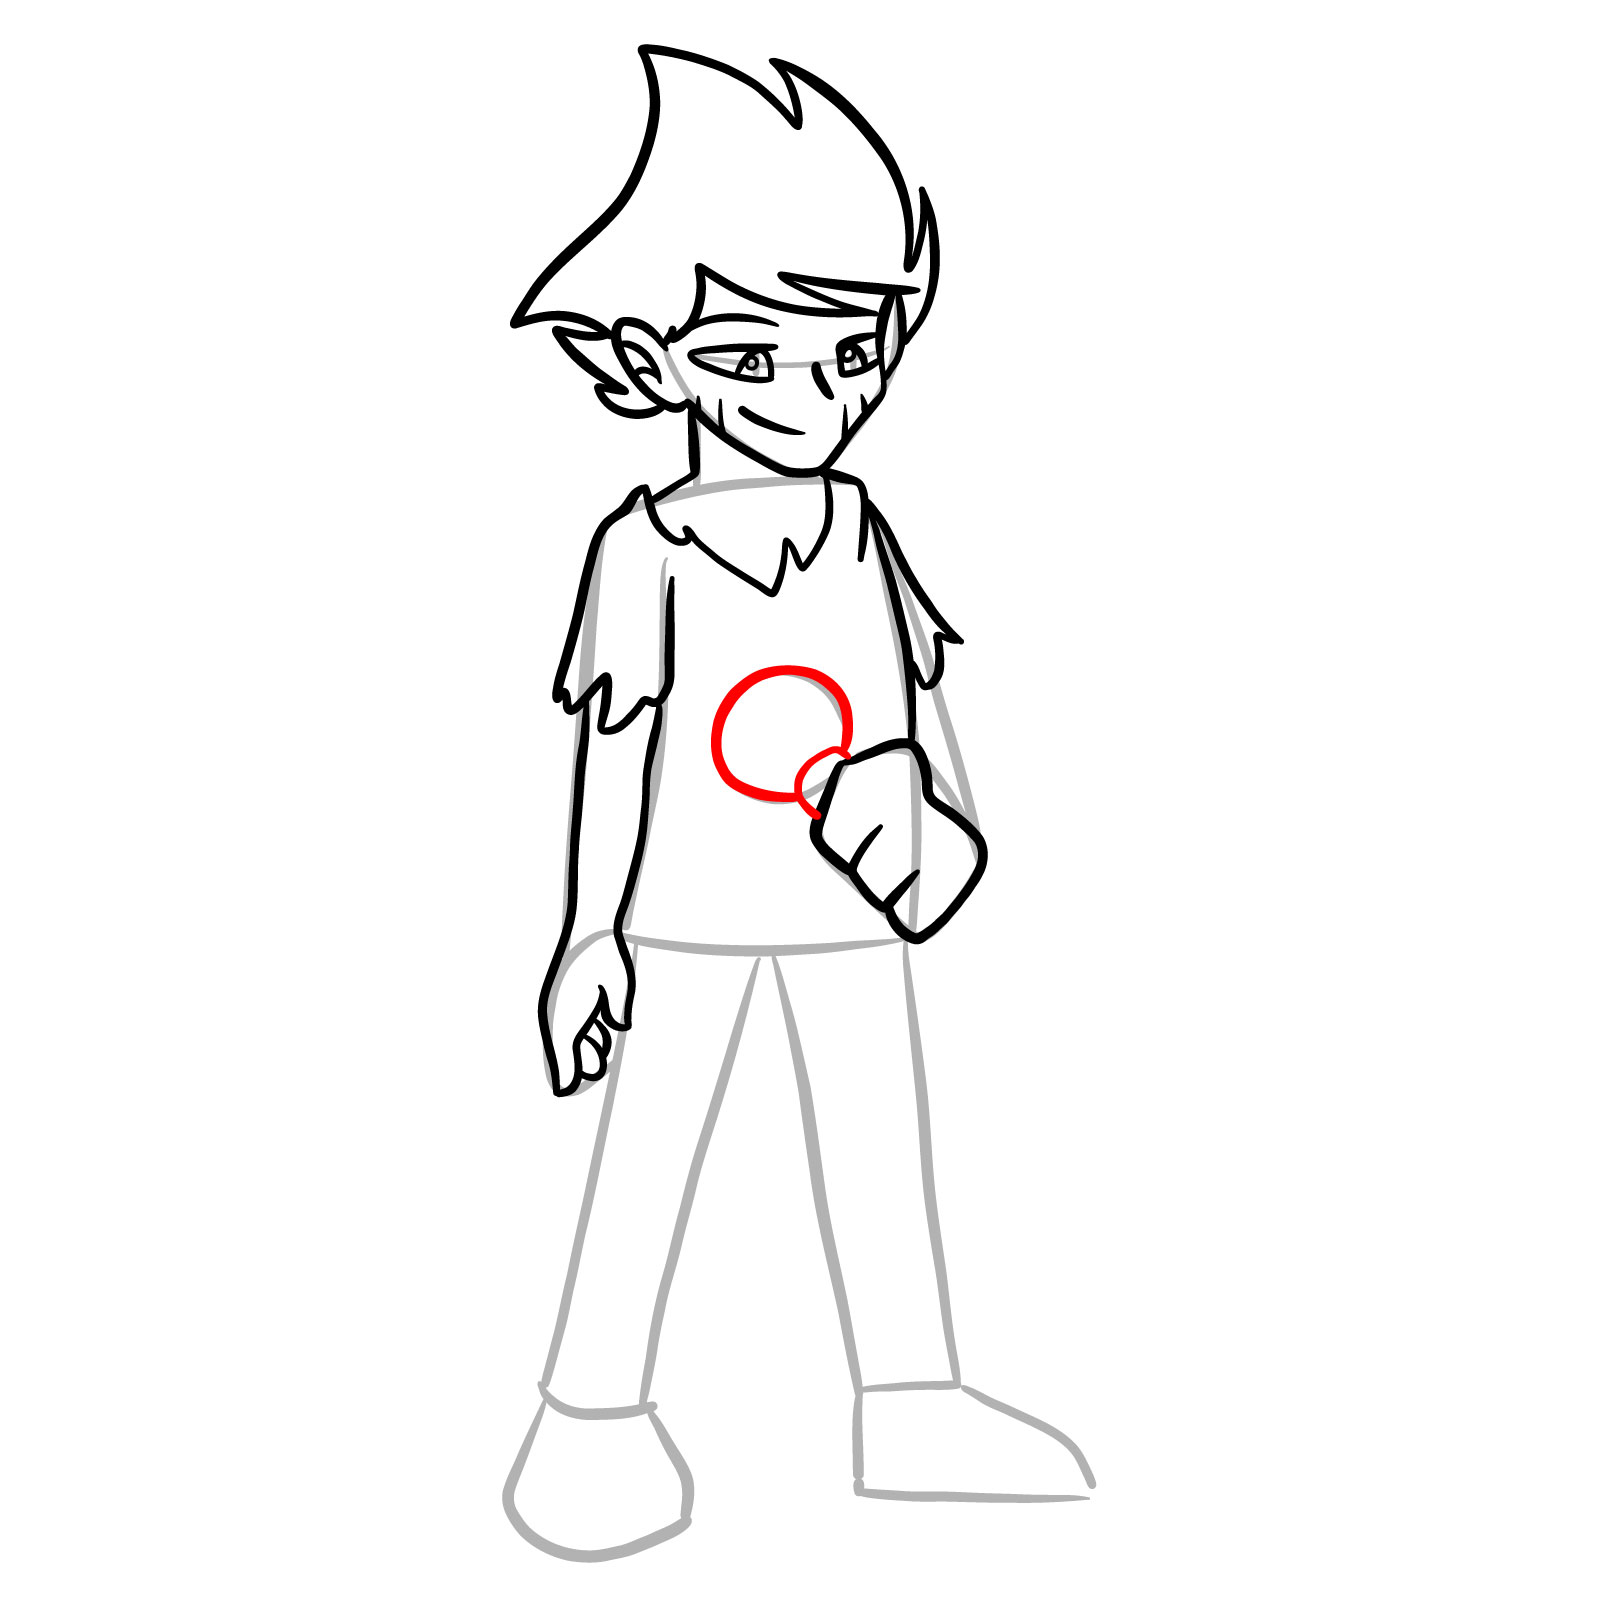 How to draw Bosip from FNF - step 20